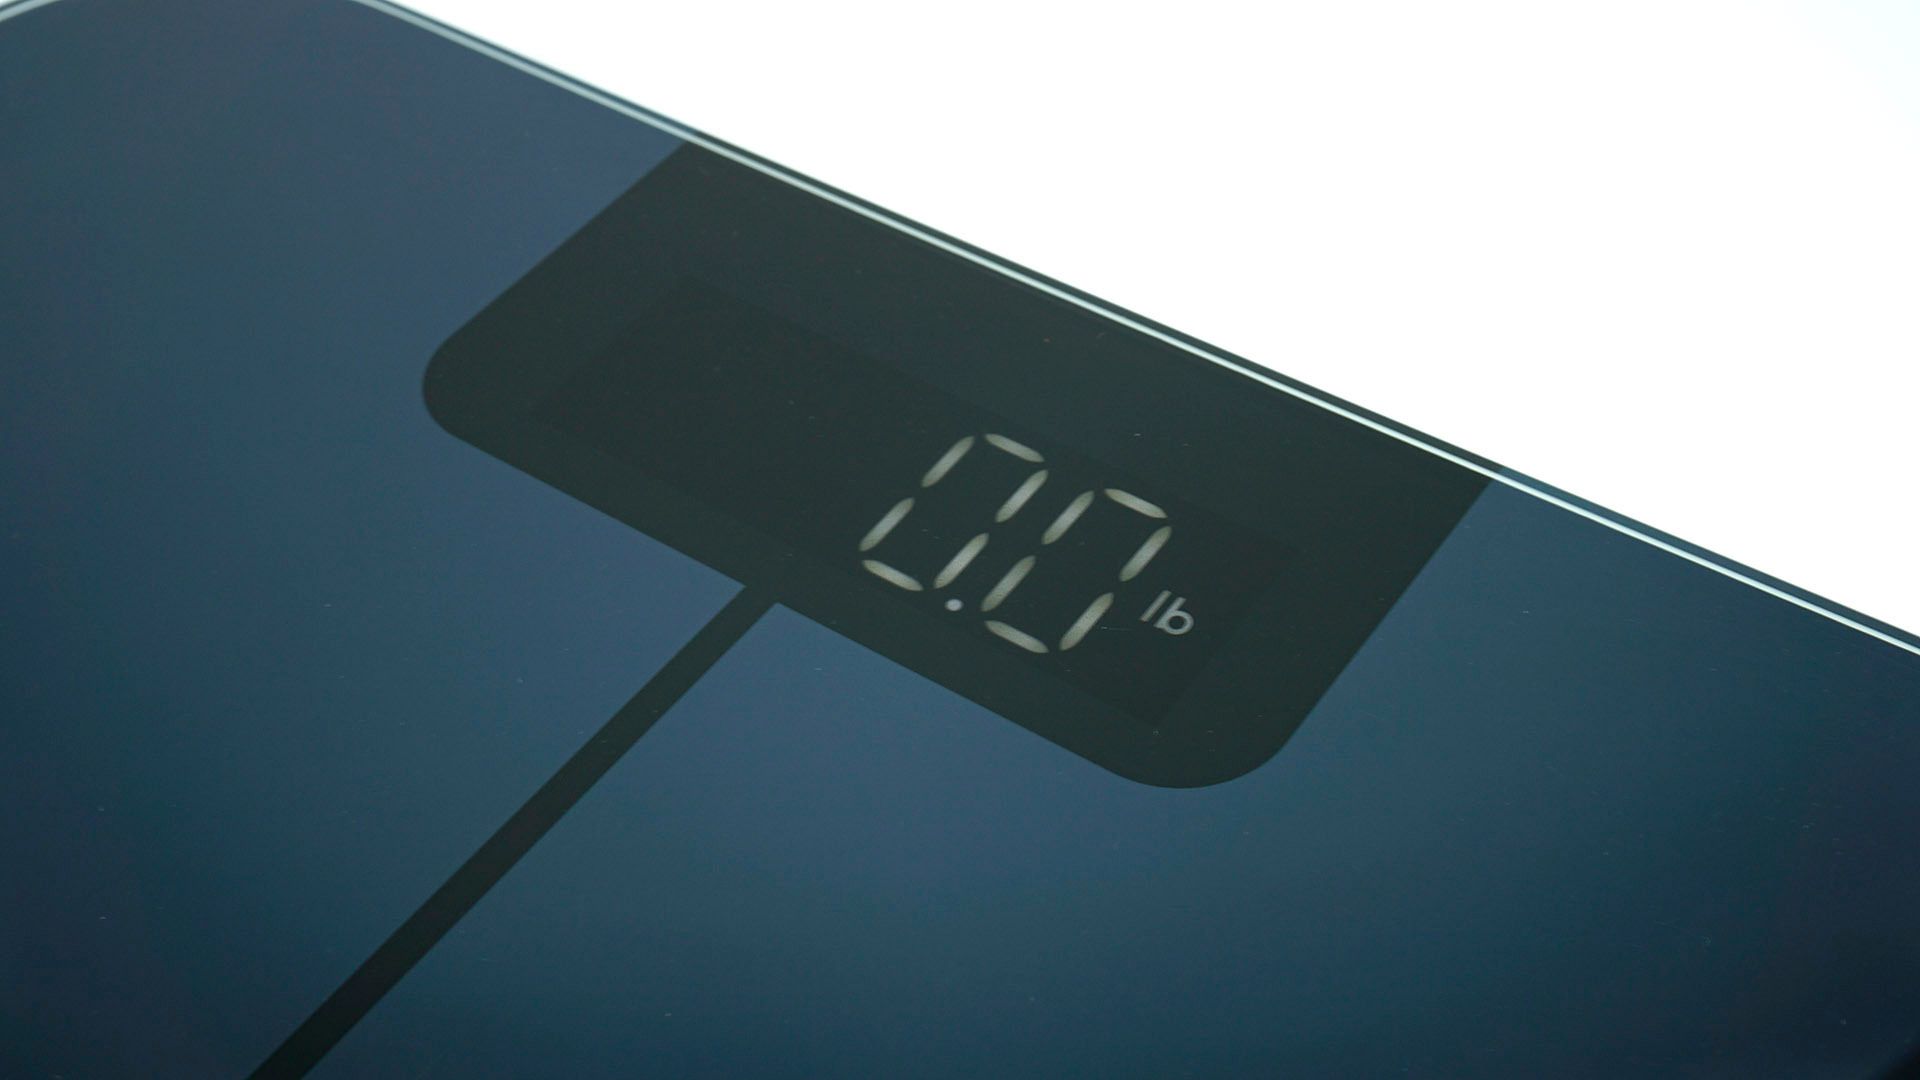 A closeup of the digital display on the Wyze Scale